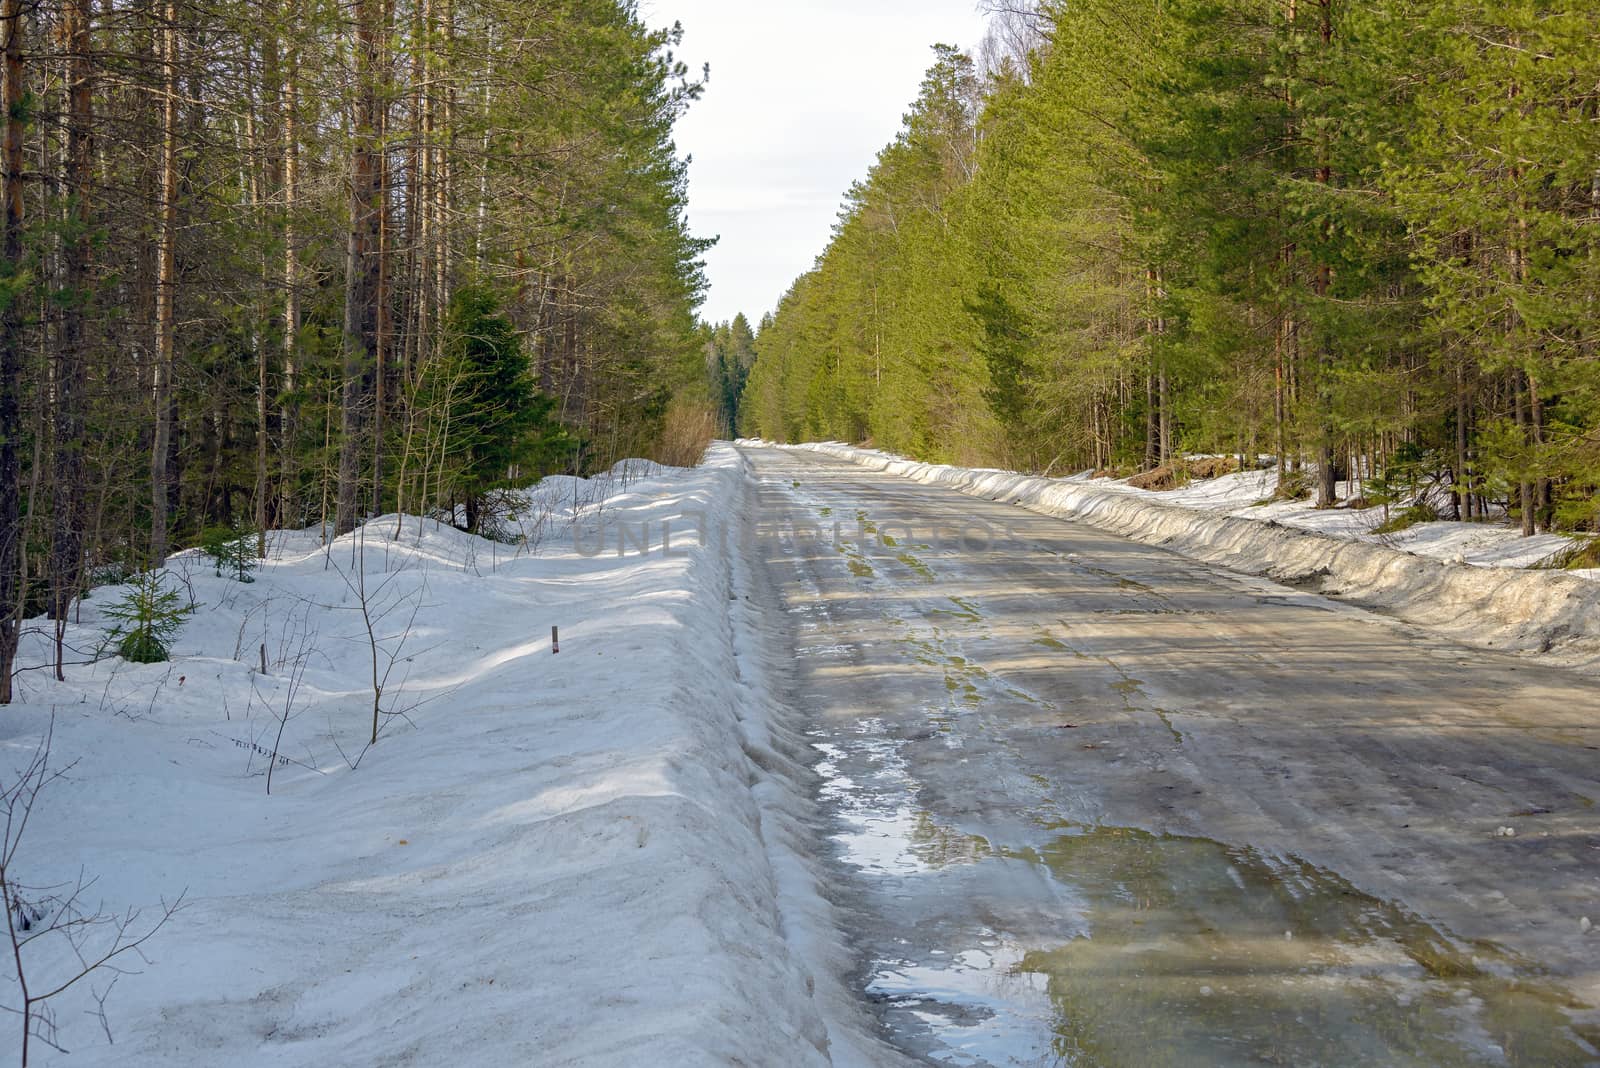 Temporary winter road in puddles of thawed snow among coniferous trees in spring.